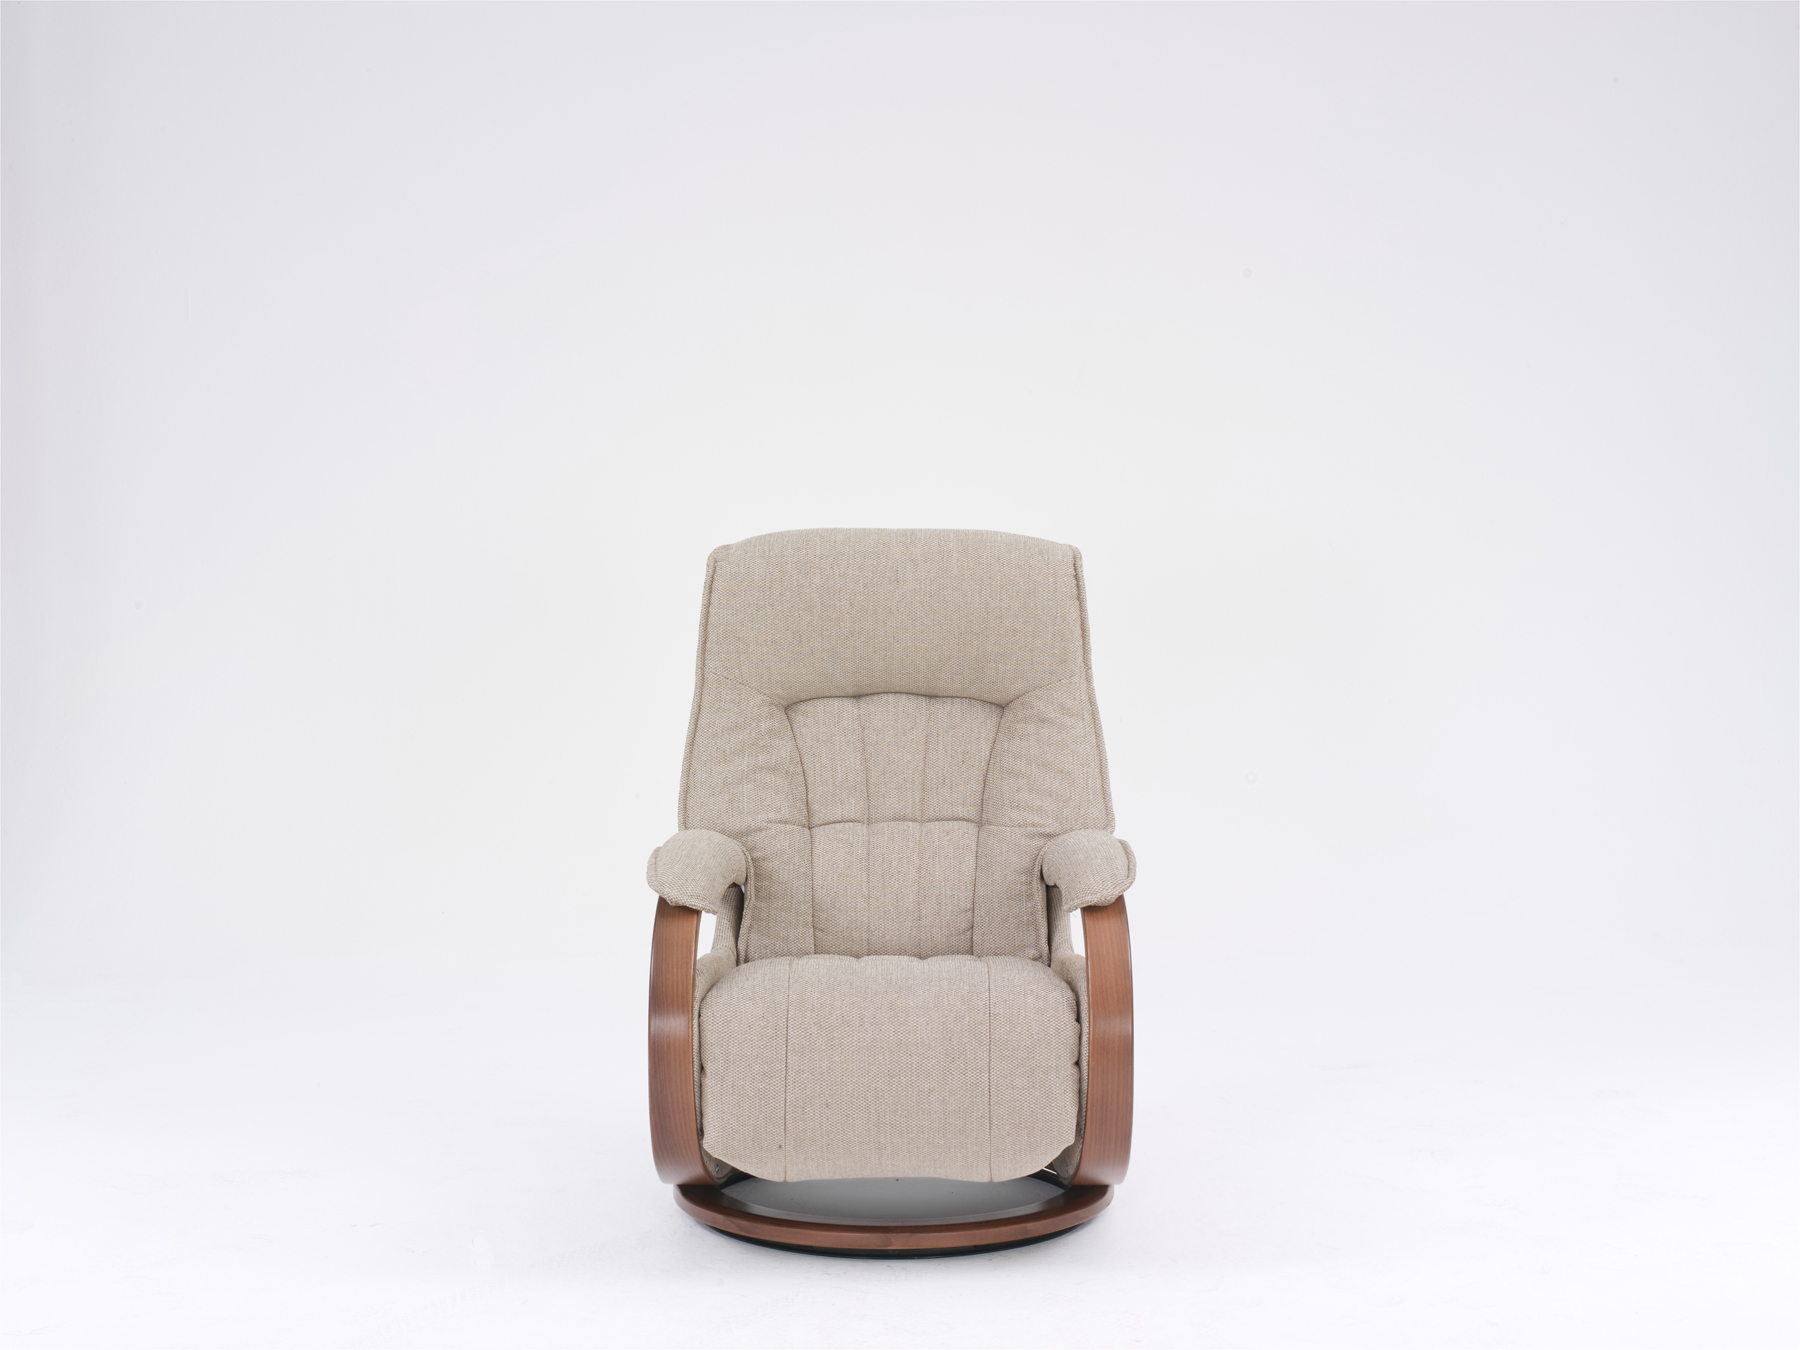 HIMOLLA MOSEL FABRIC CHAIR FRONT VIEW